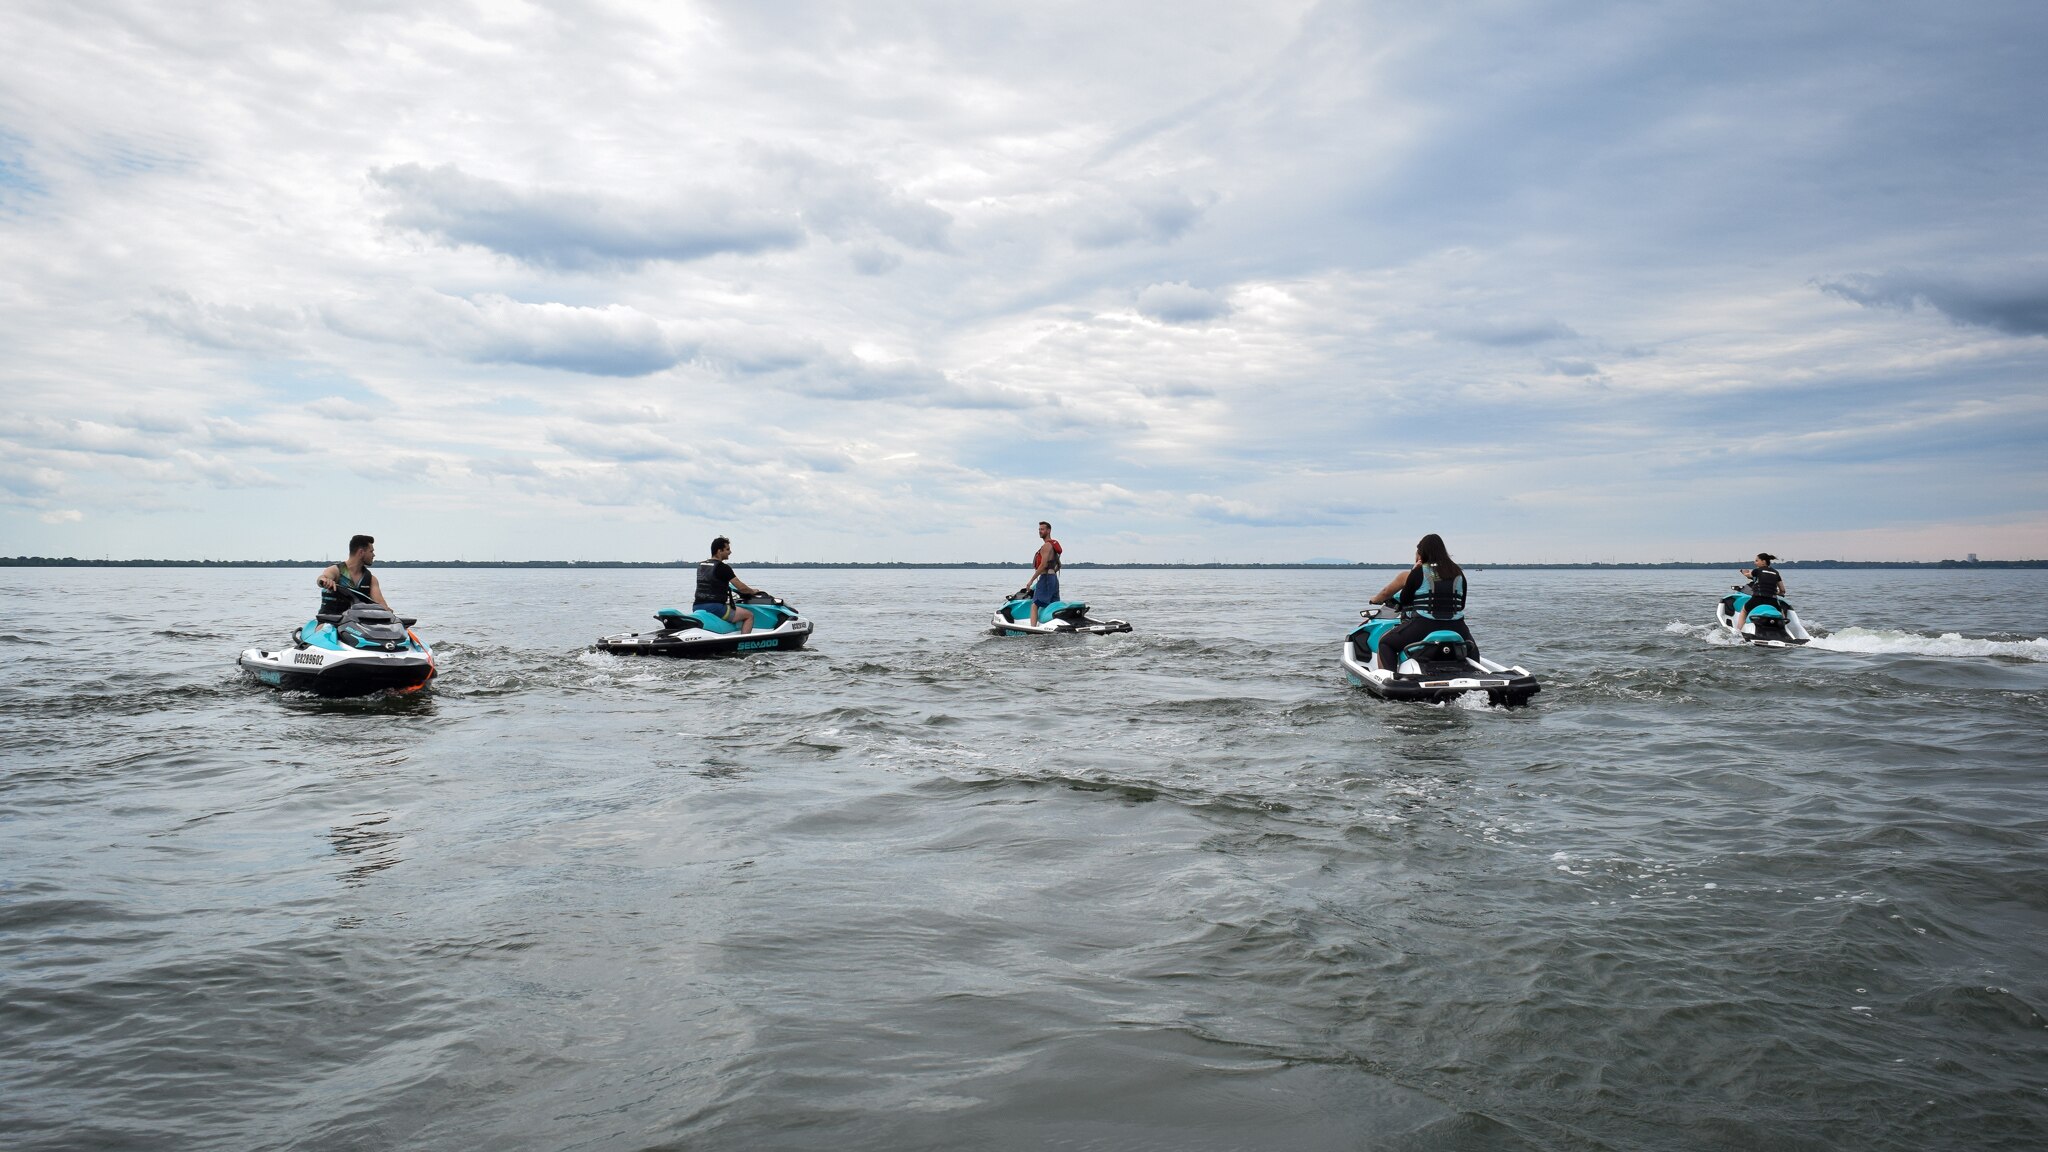 A group of people on Sea-Doo PWCs talking in the middle of the water